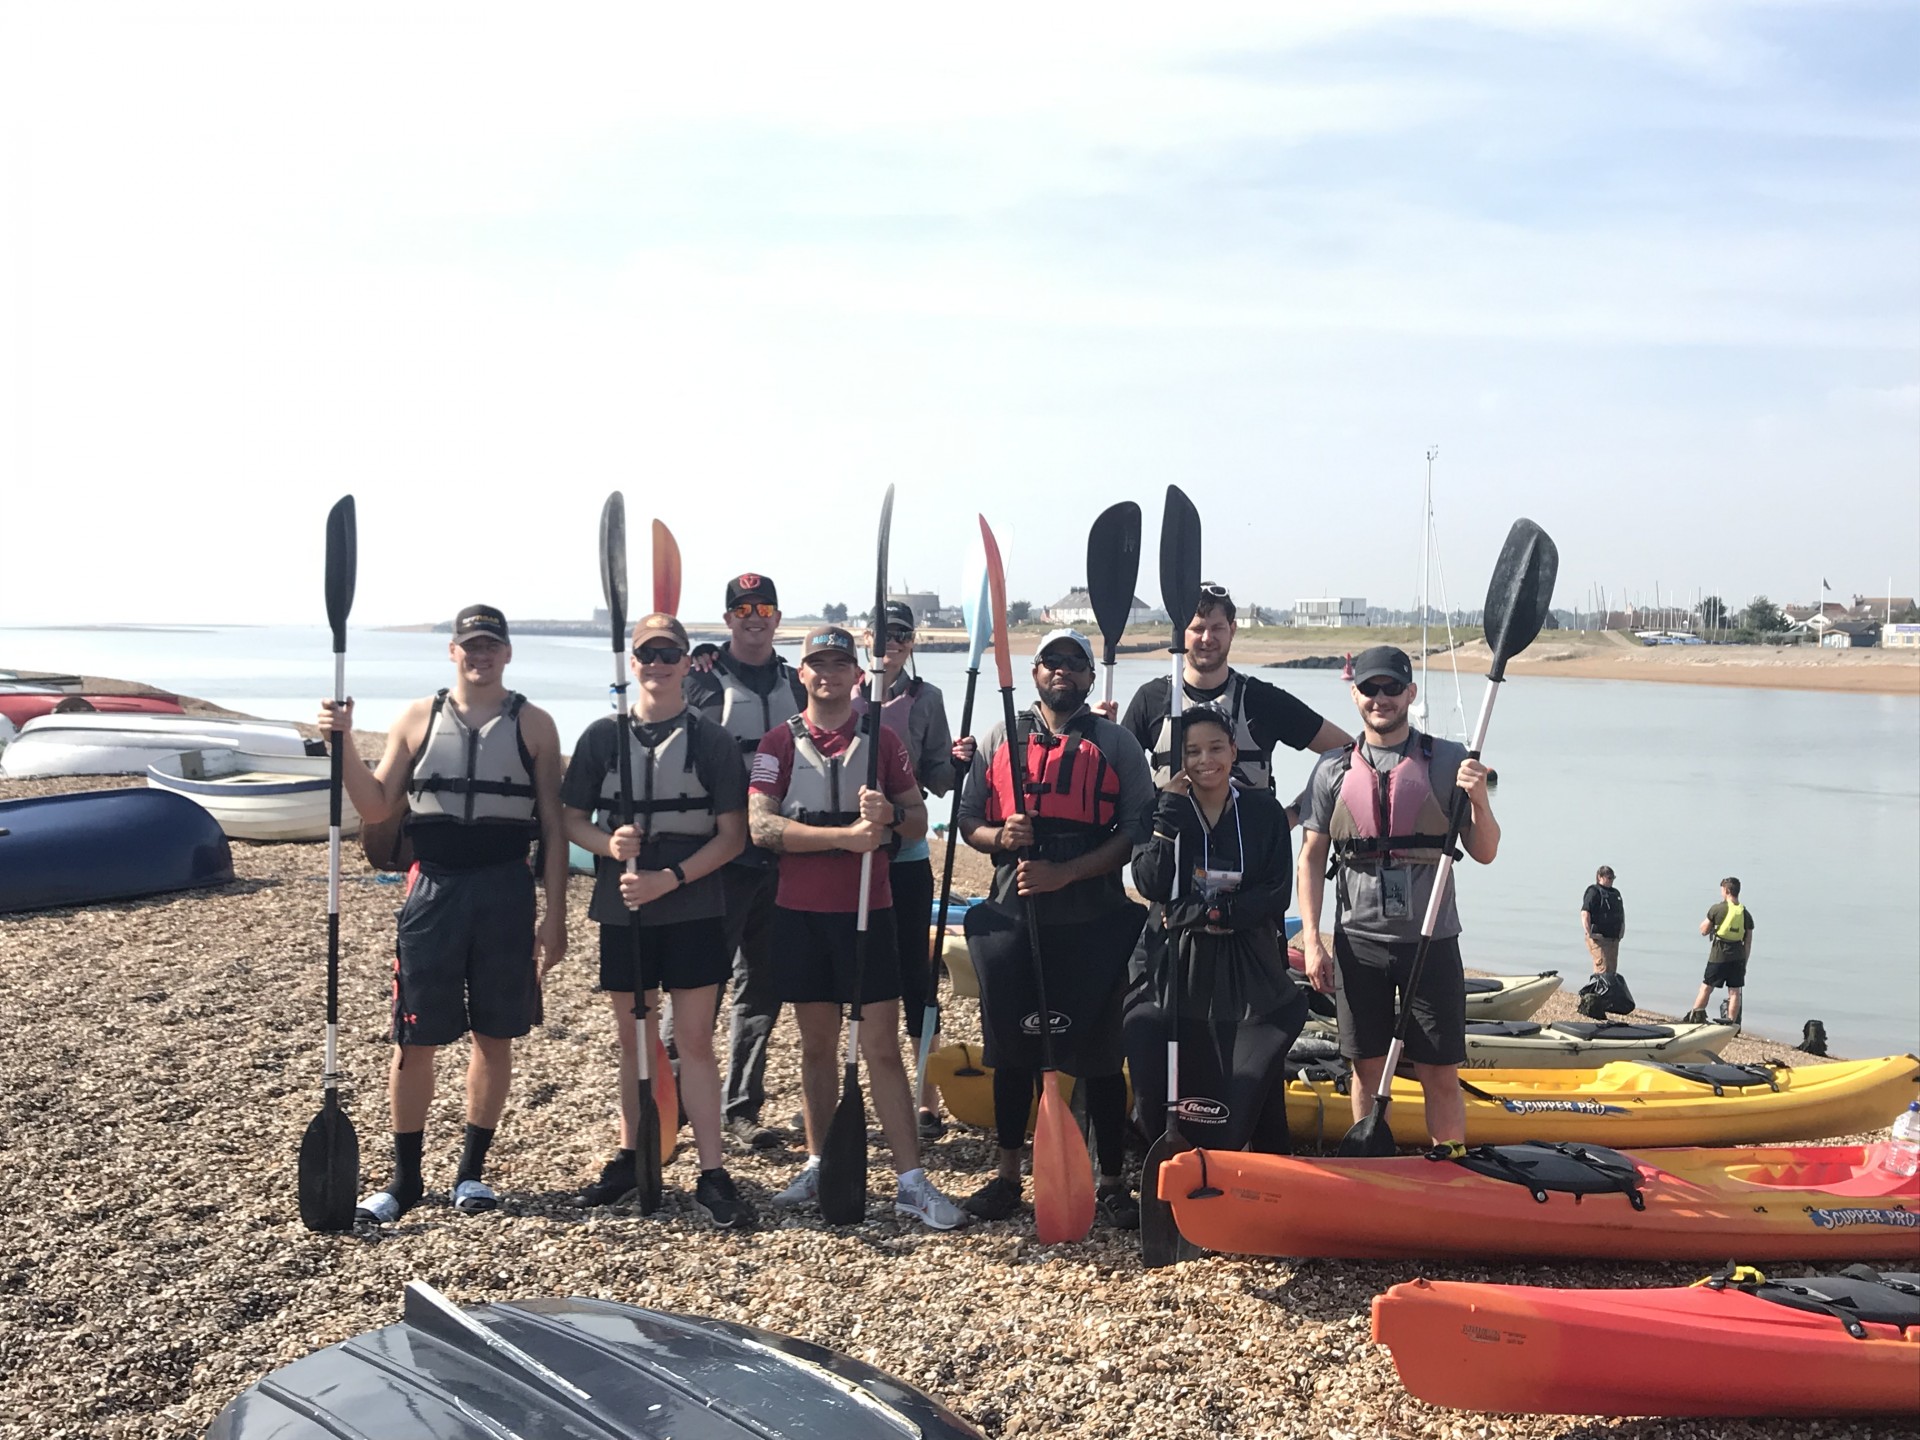 RAF Mildenhall group photo on the beach with NOMAD Sea Kayaking.